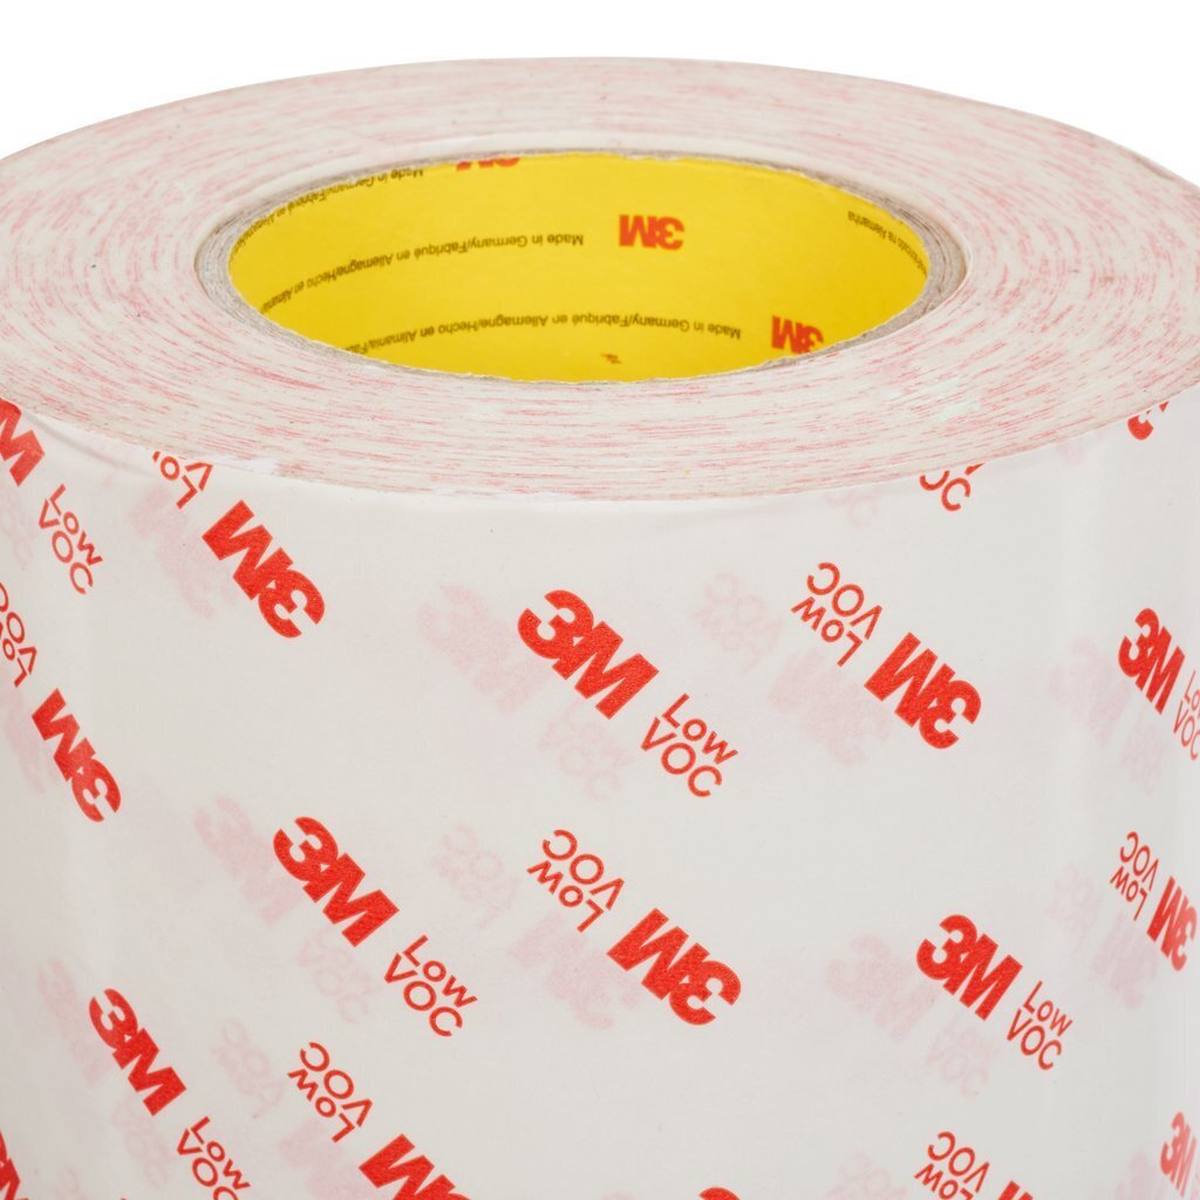 3M Double-sided adhesive tape with non-woven paper backing 99015LVC, white, 38 mm x 50 m, 0.15 mm